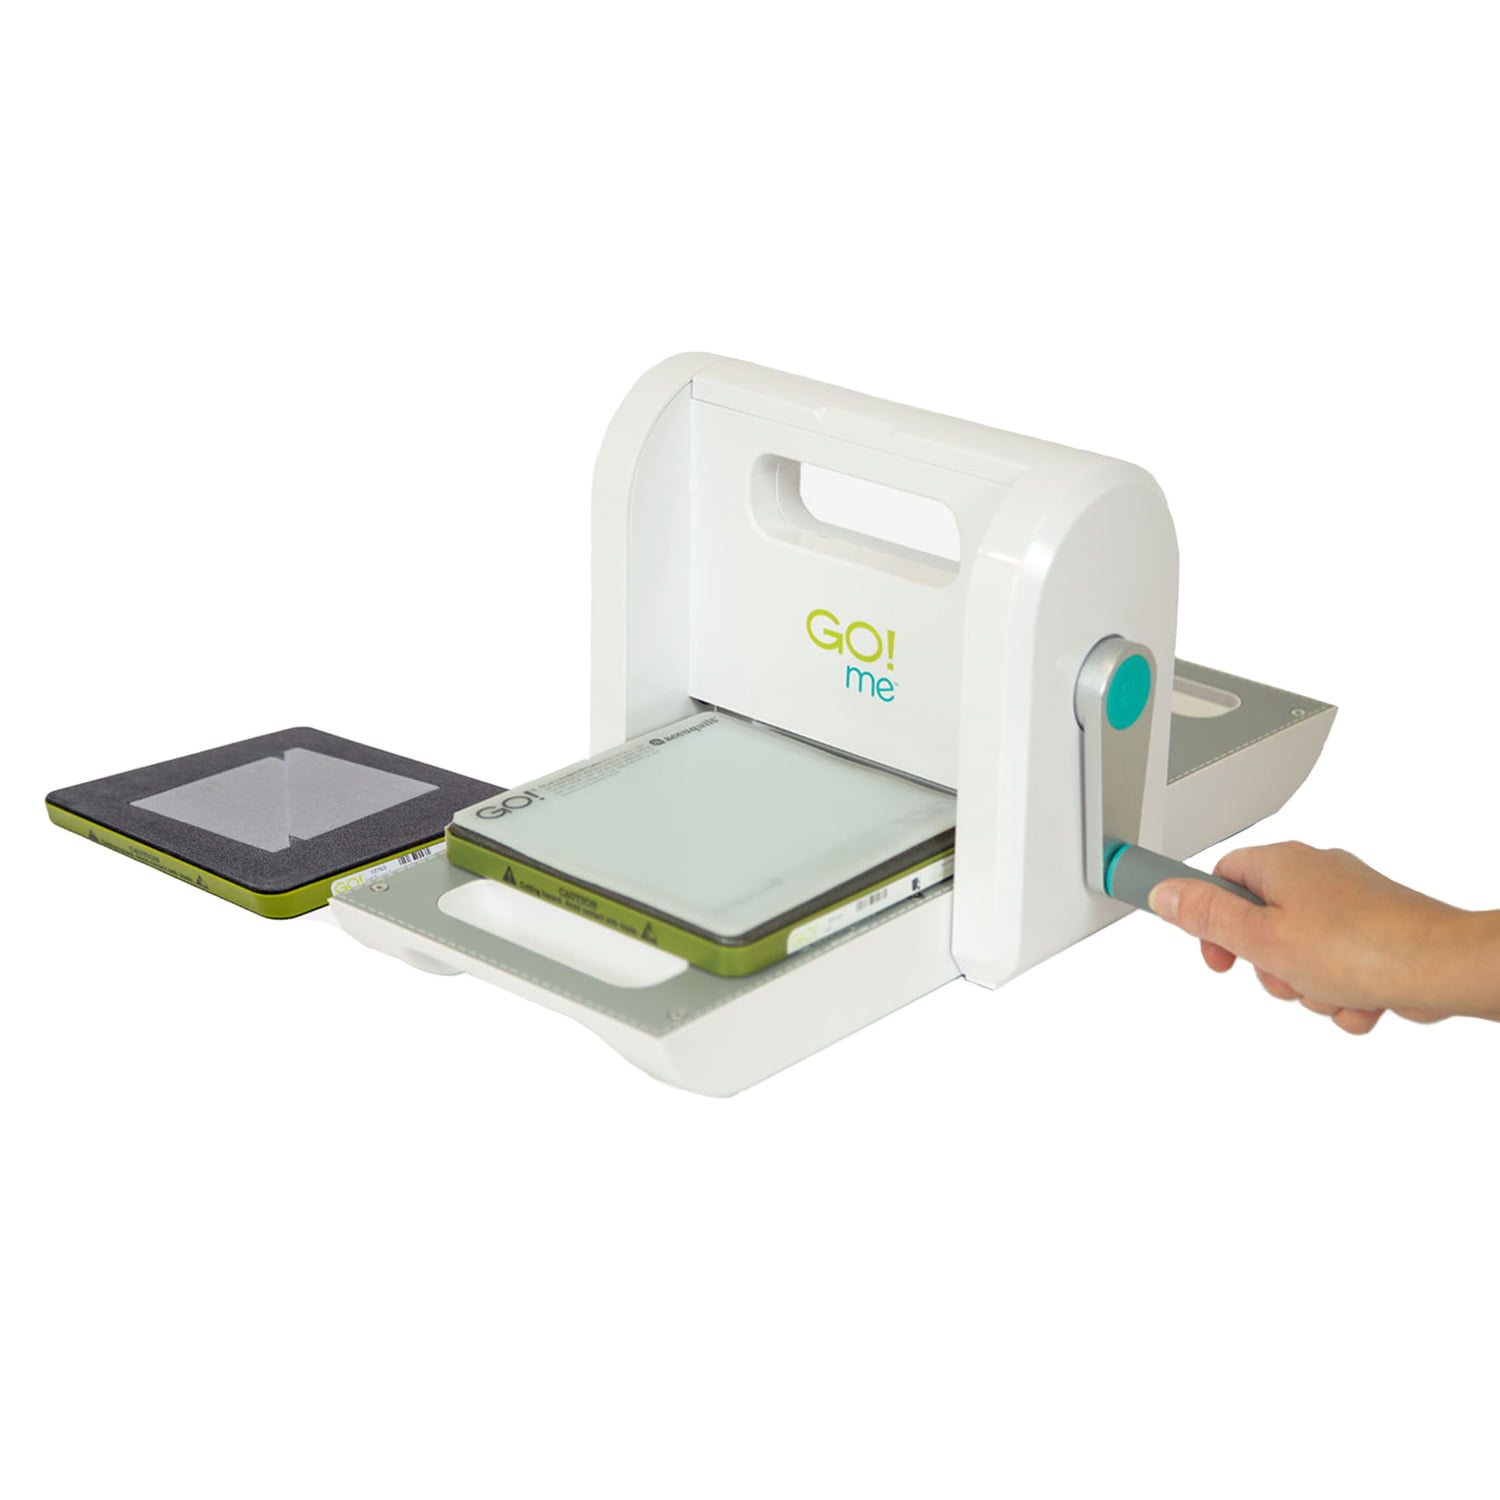 GO! Baby Fabric Cutter- Gift With Purchase (BONUS DEAL $117 Value